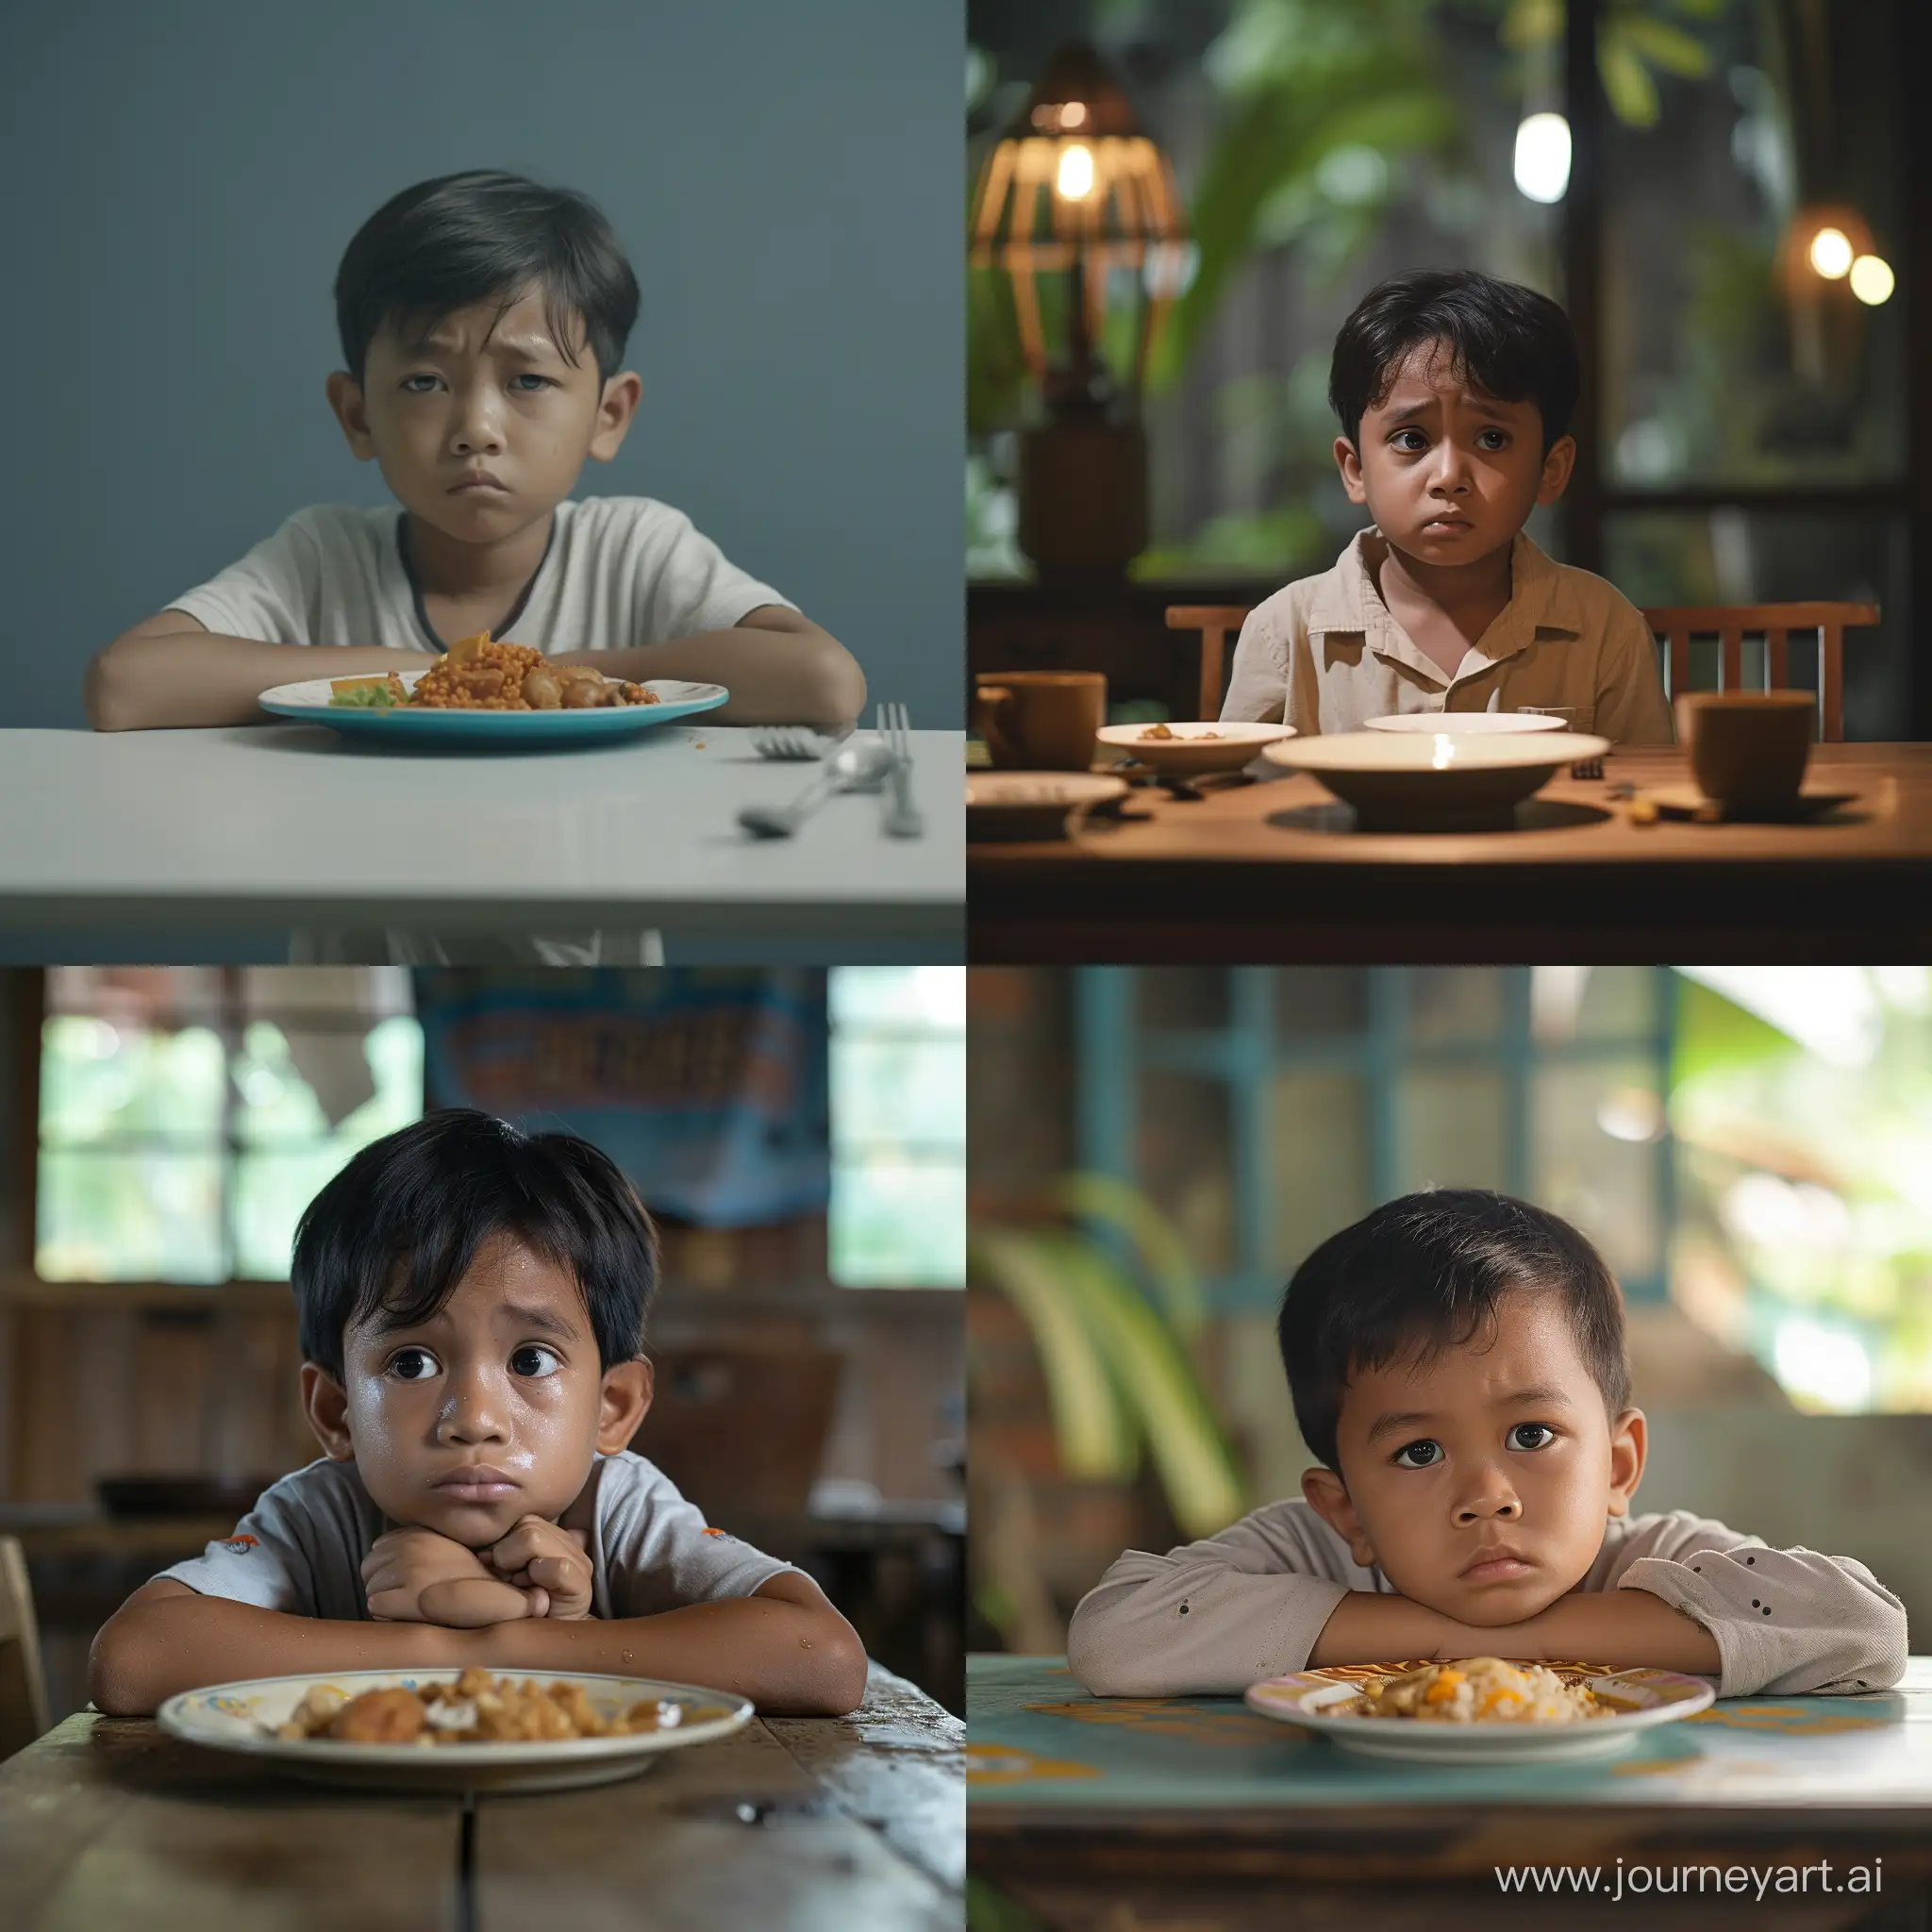 A 5 year old indonesian boy looked gloomy and had no appetite at a simple dining table. Movie scene